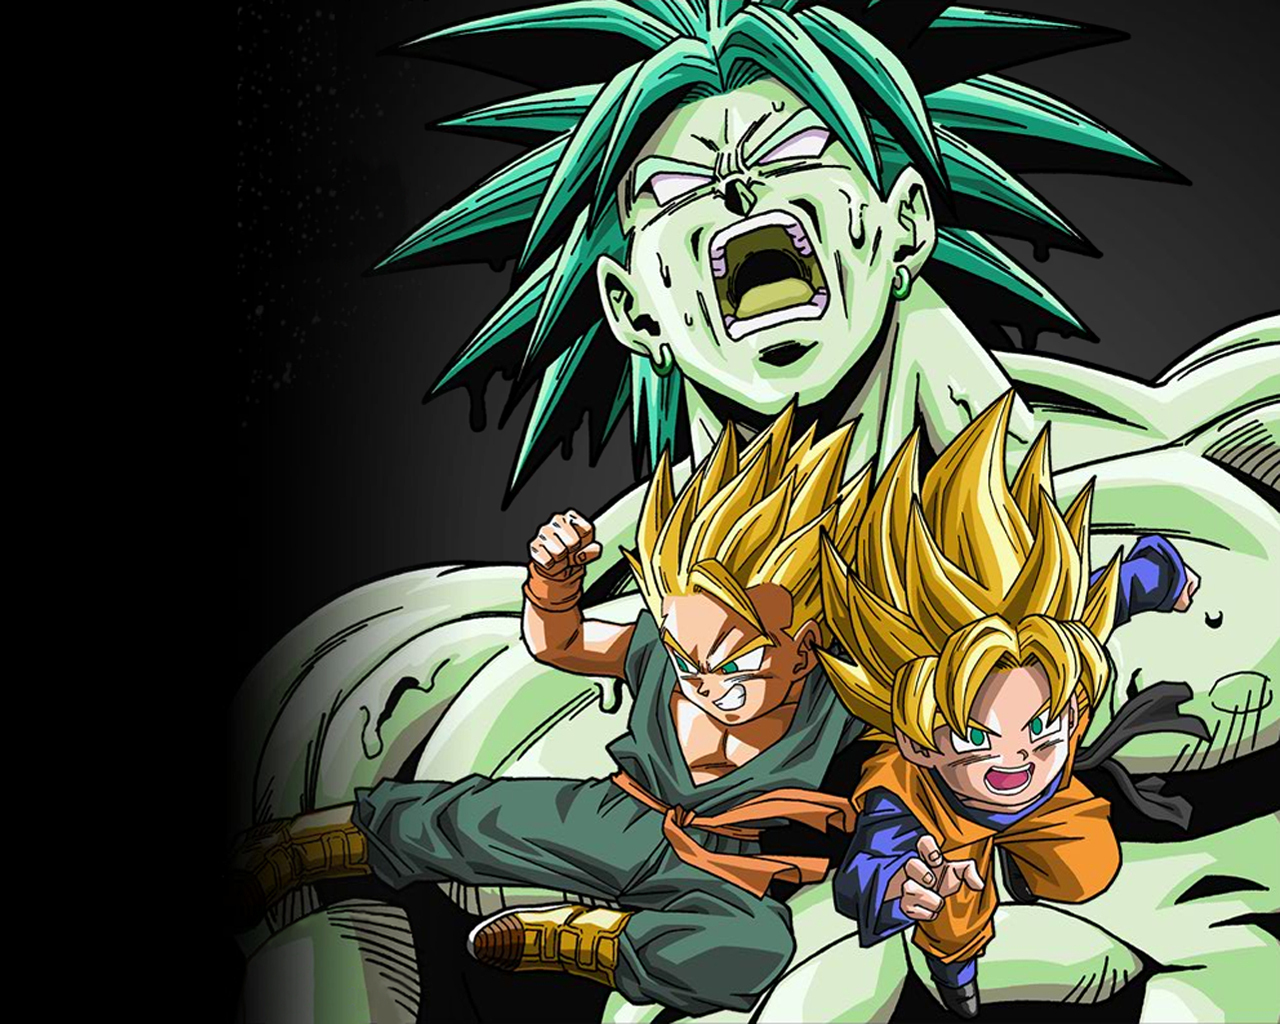 Goten, Trunks and Broly